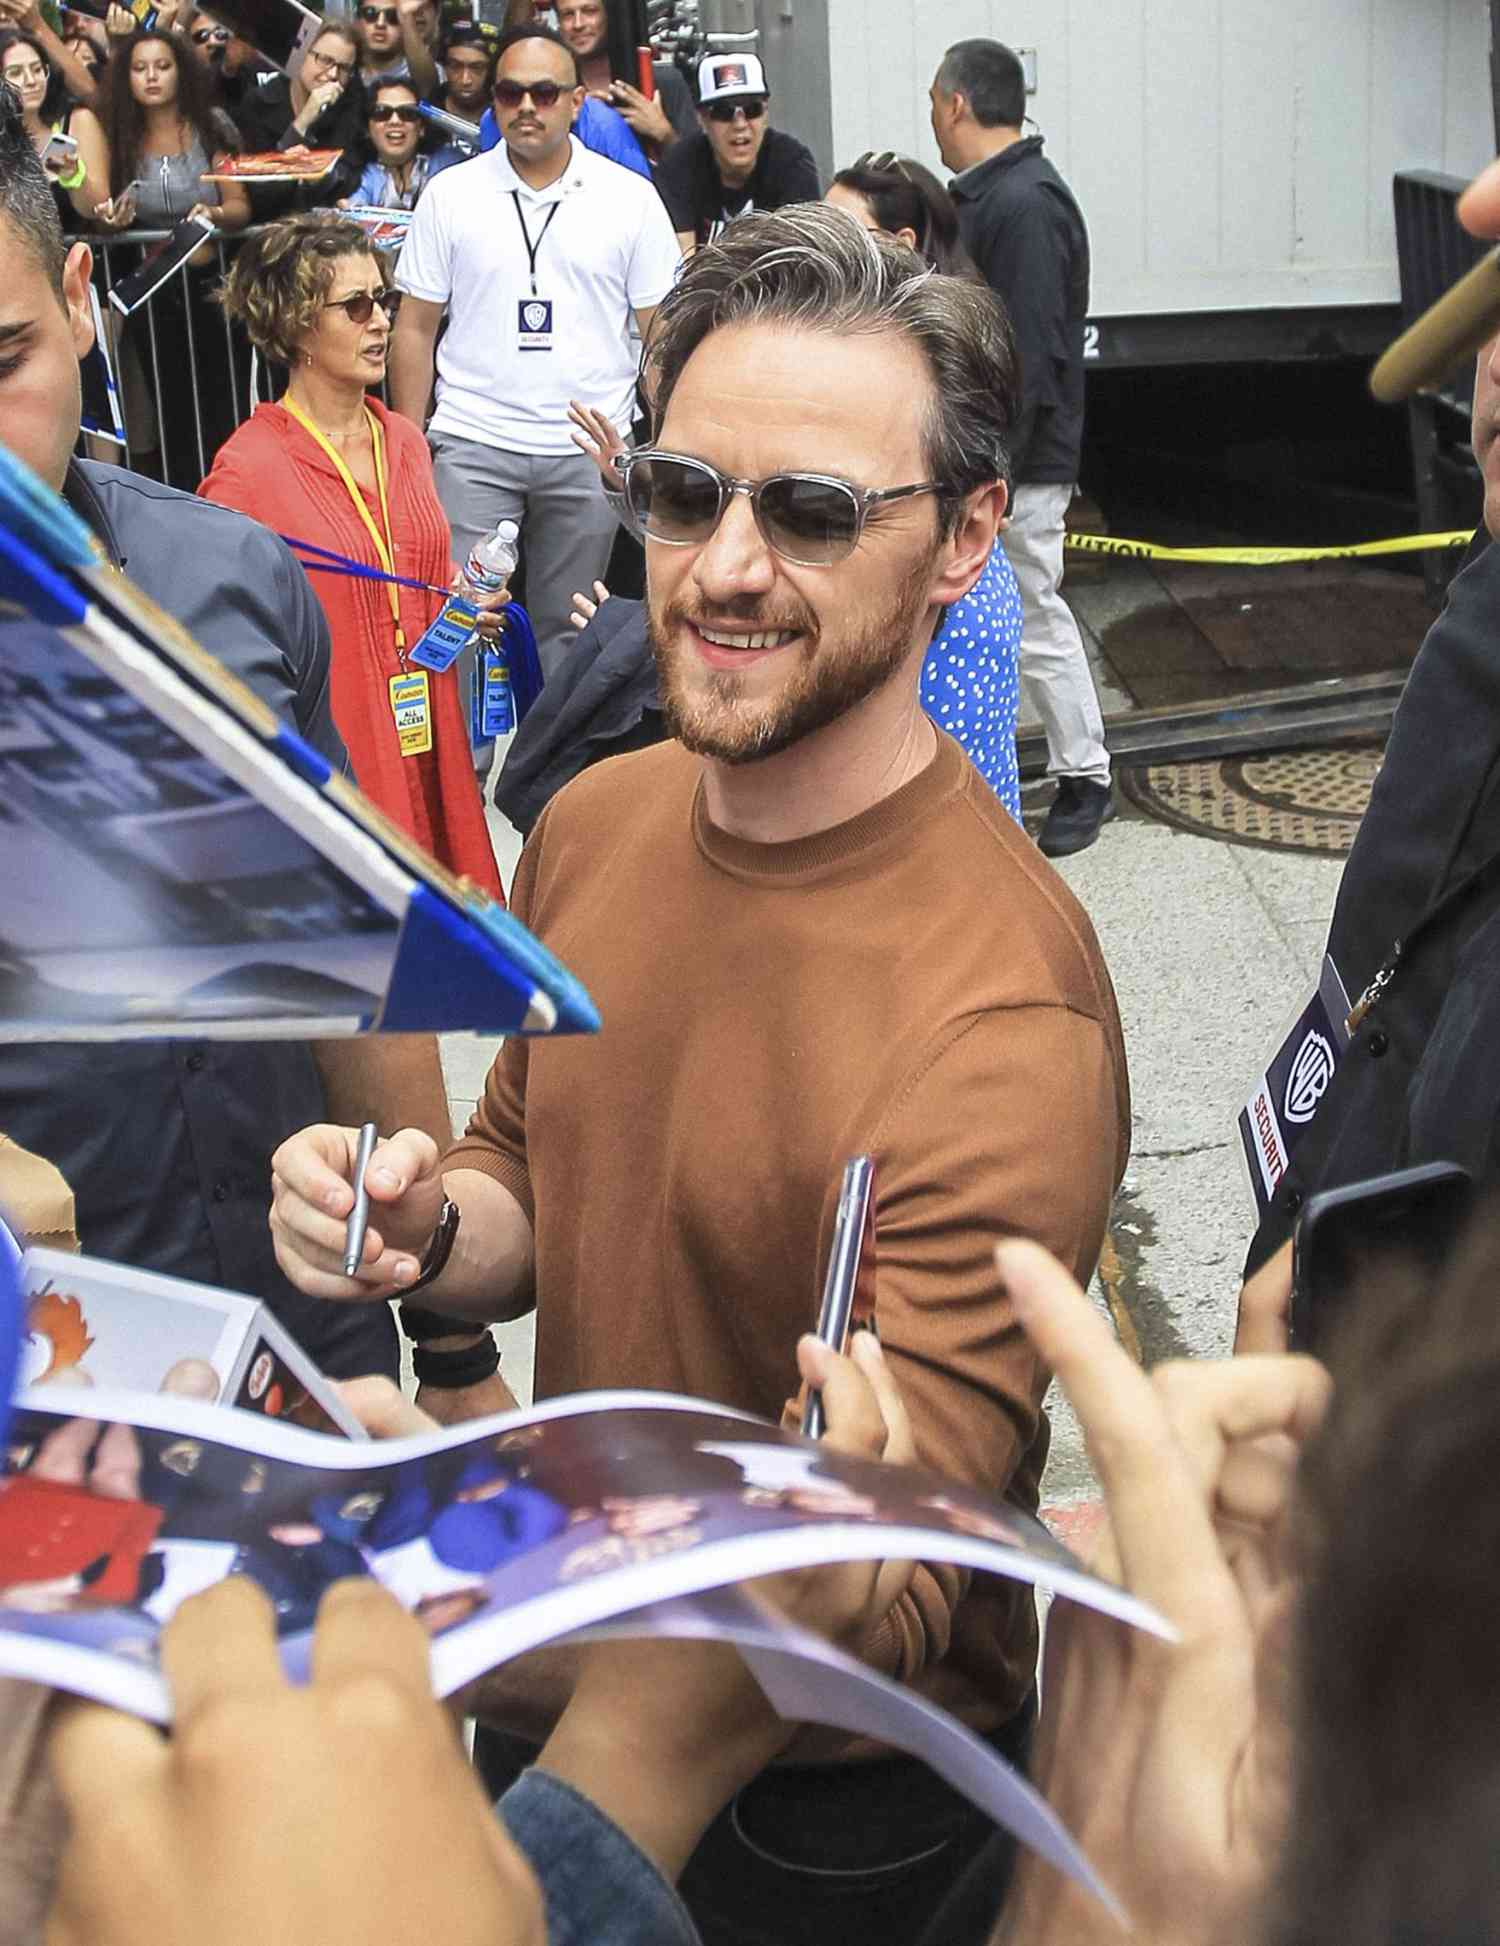 SAN DIEGO, CA - JULY 17: James McAvoy is seen on July 17, 2019 in San Diego, California. (Photo by gotpap/Bauer-Griffin/GC Images)